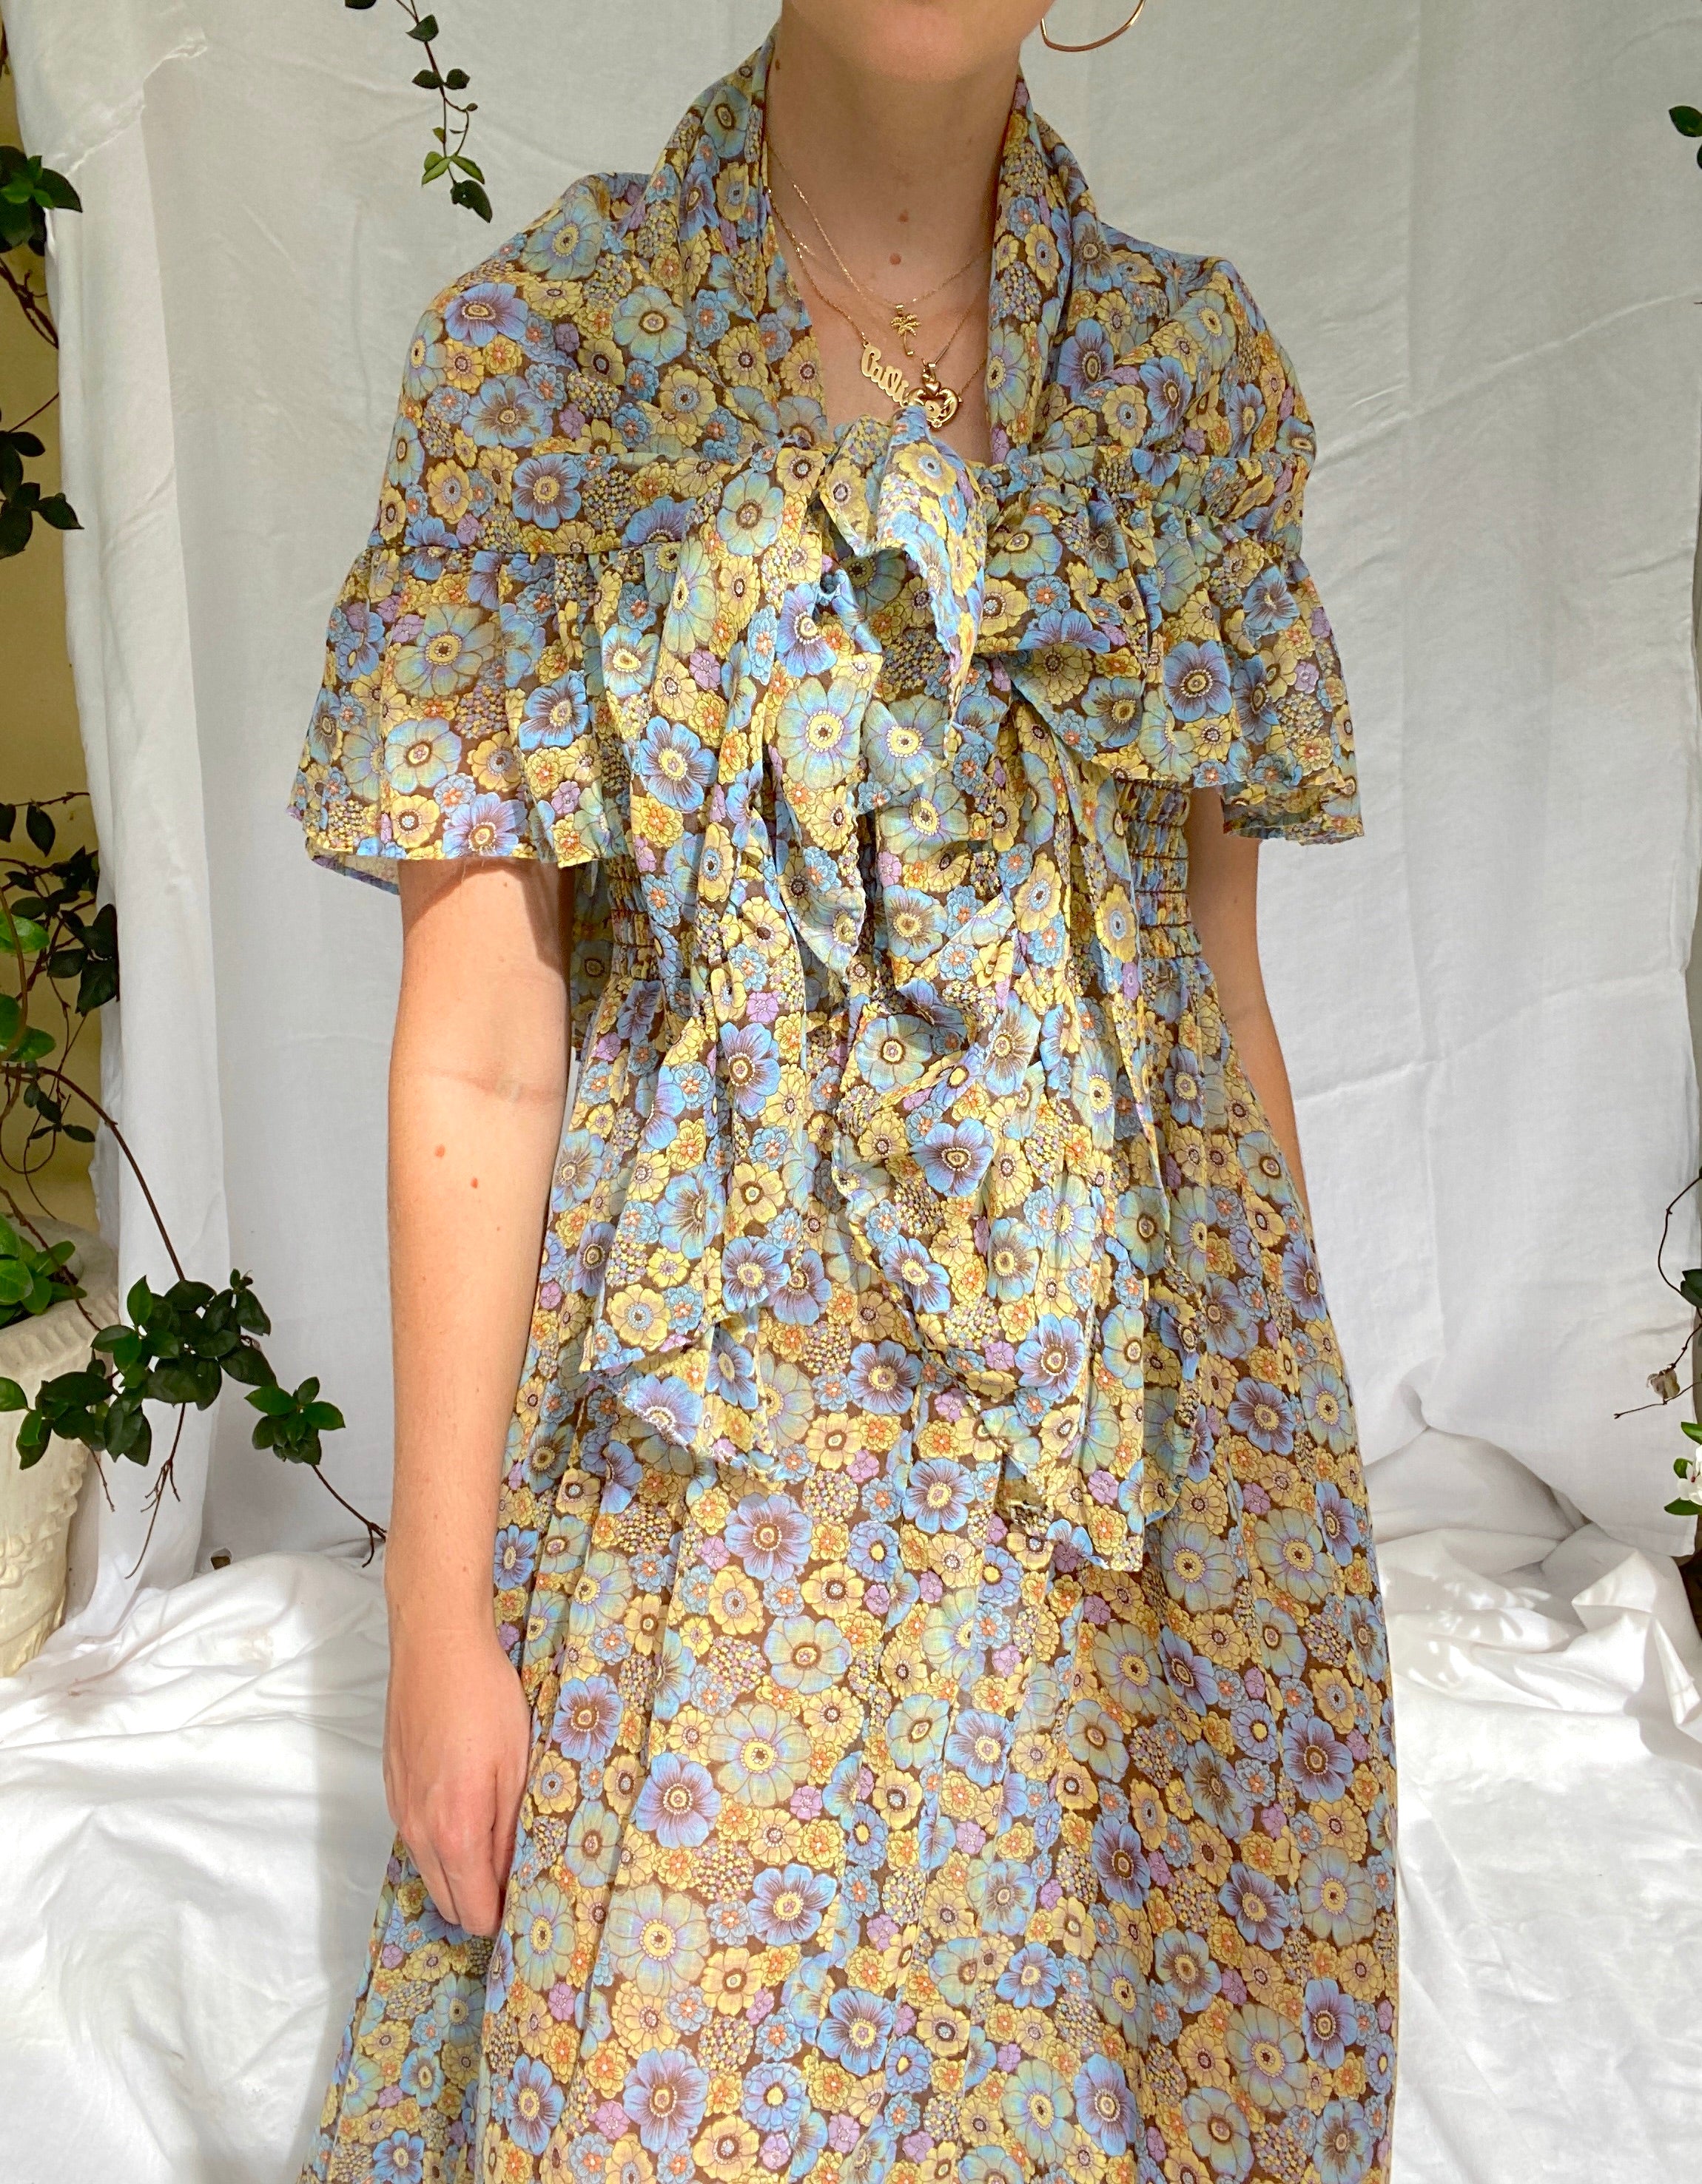 1960's Floral Print Voile Dress with Matching Shawl